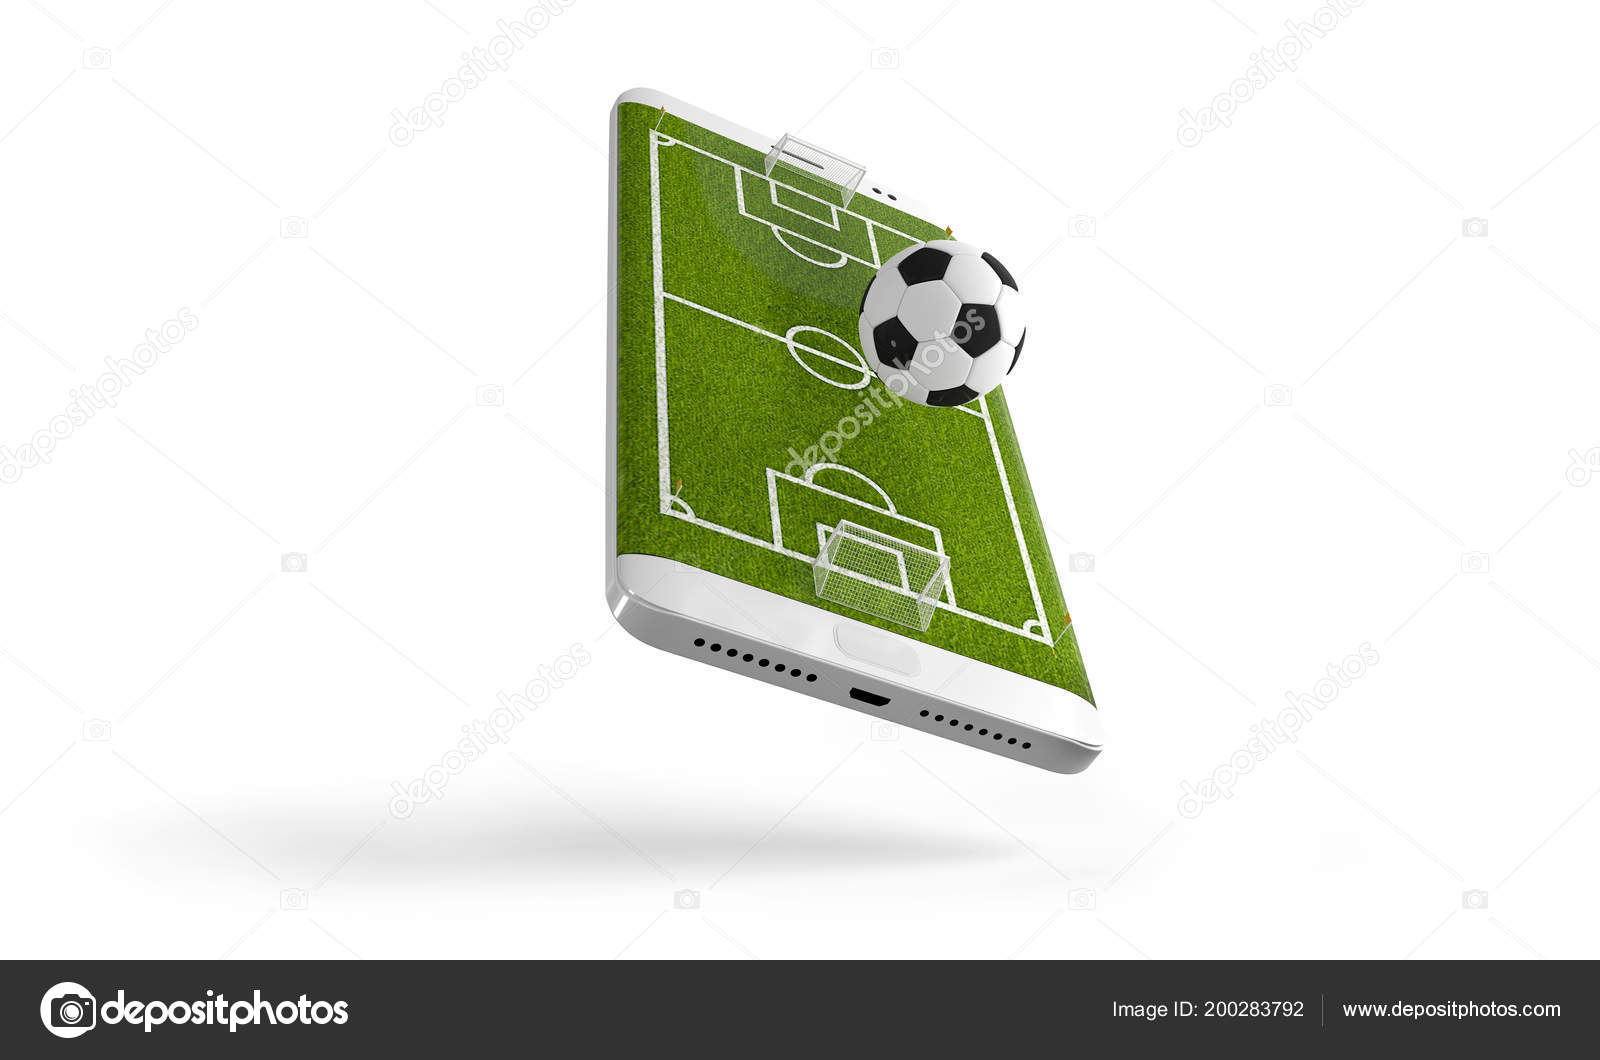 Mobile soccer. Football field on the smartphone screen and ball